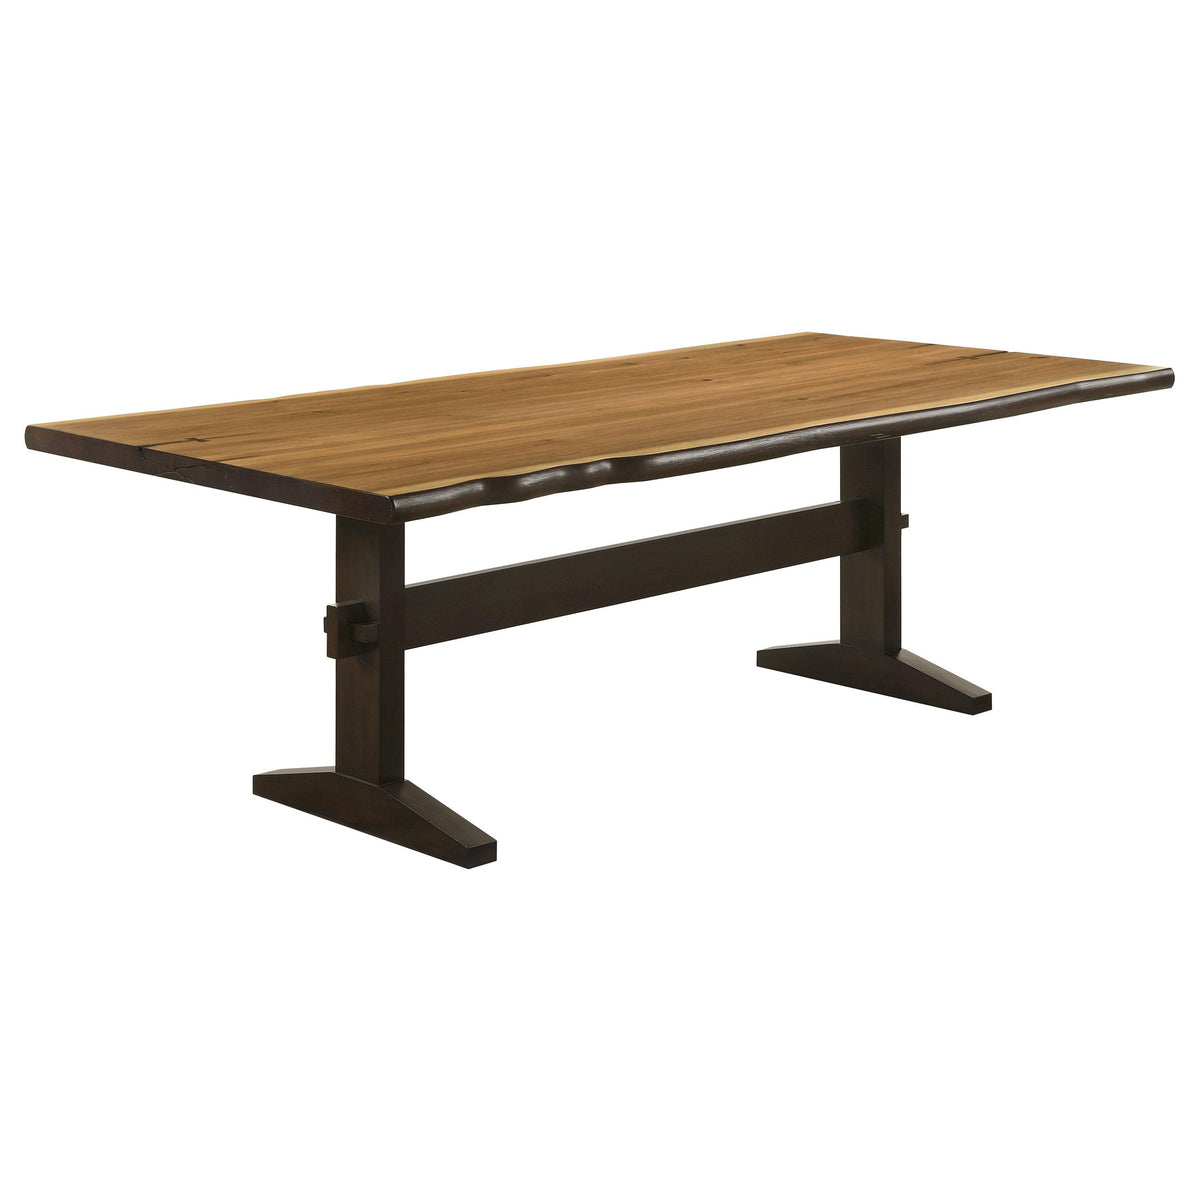 Bexley Live Edge Trestle Dining Table Natural Honey and Espresso Bexley Live Edge Trestle Dining Table Natural Honey and Espresso Half Price Furniture